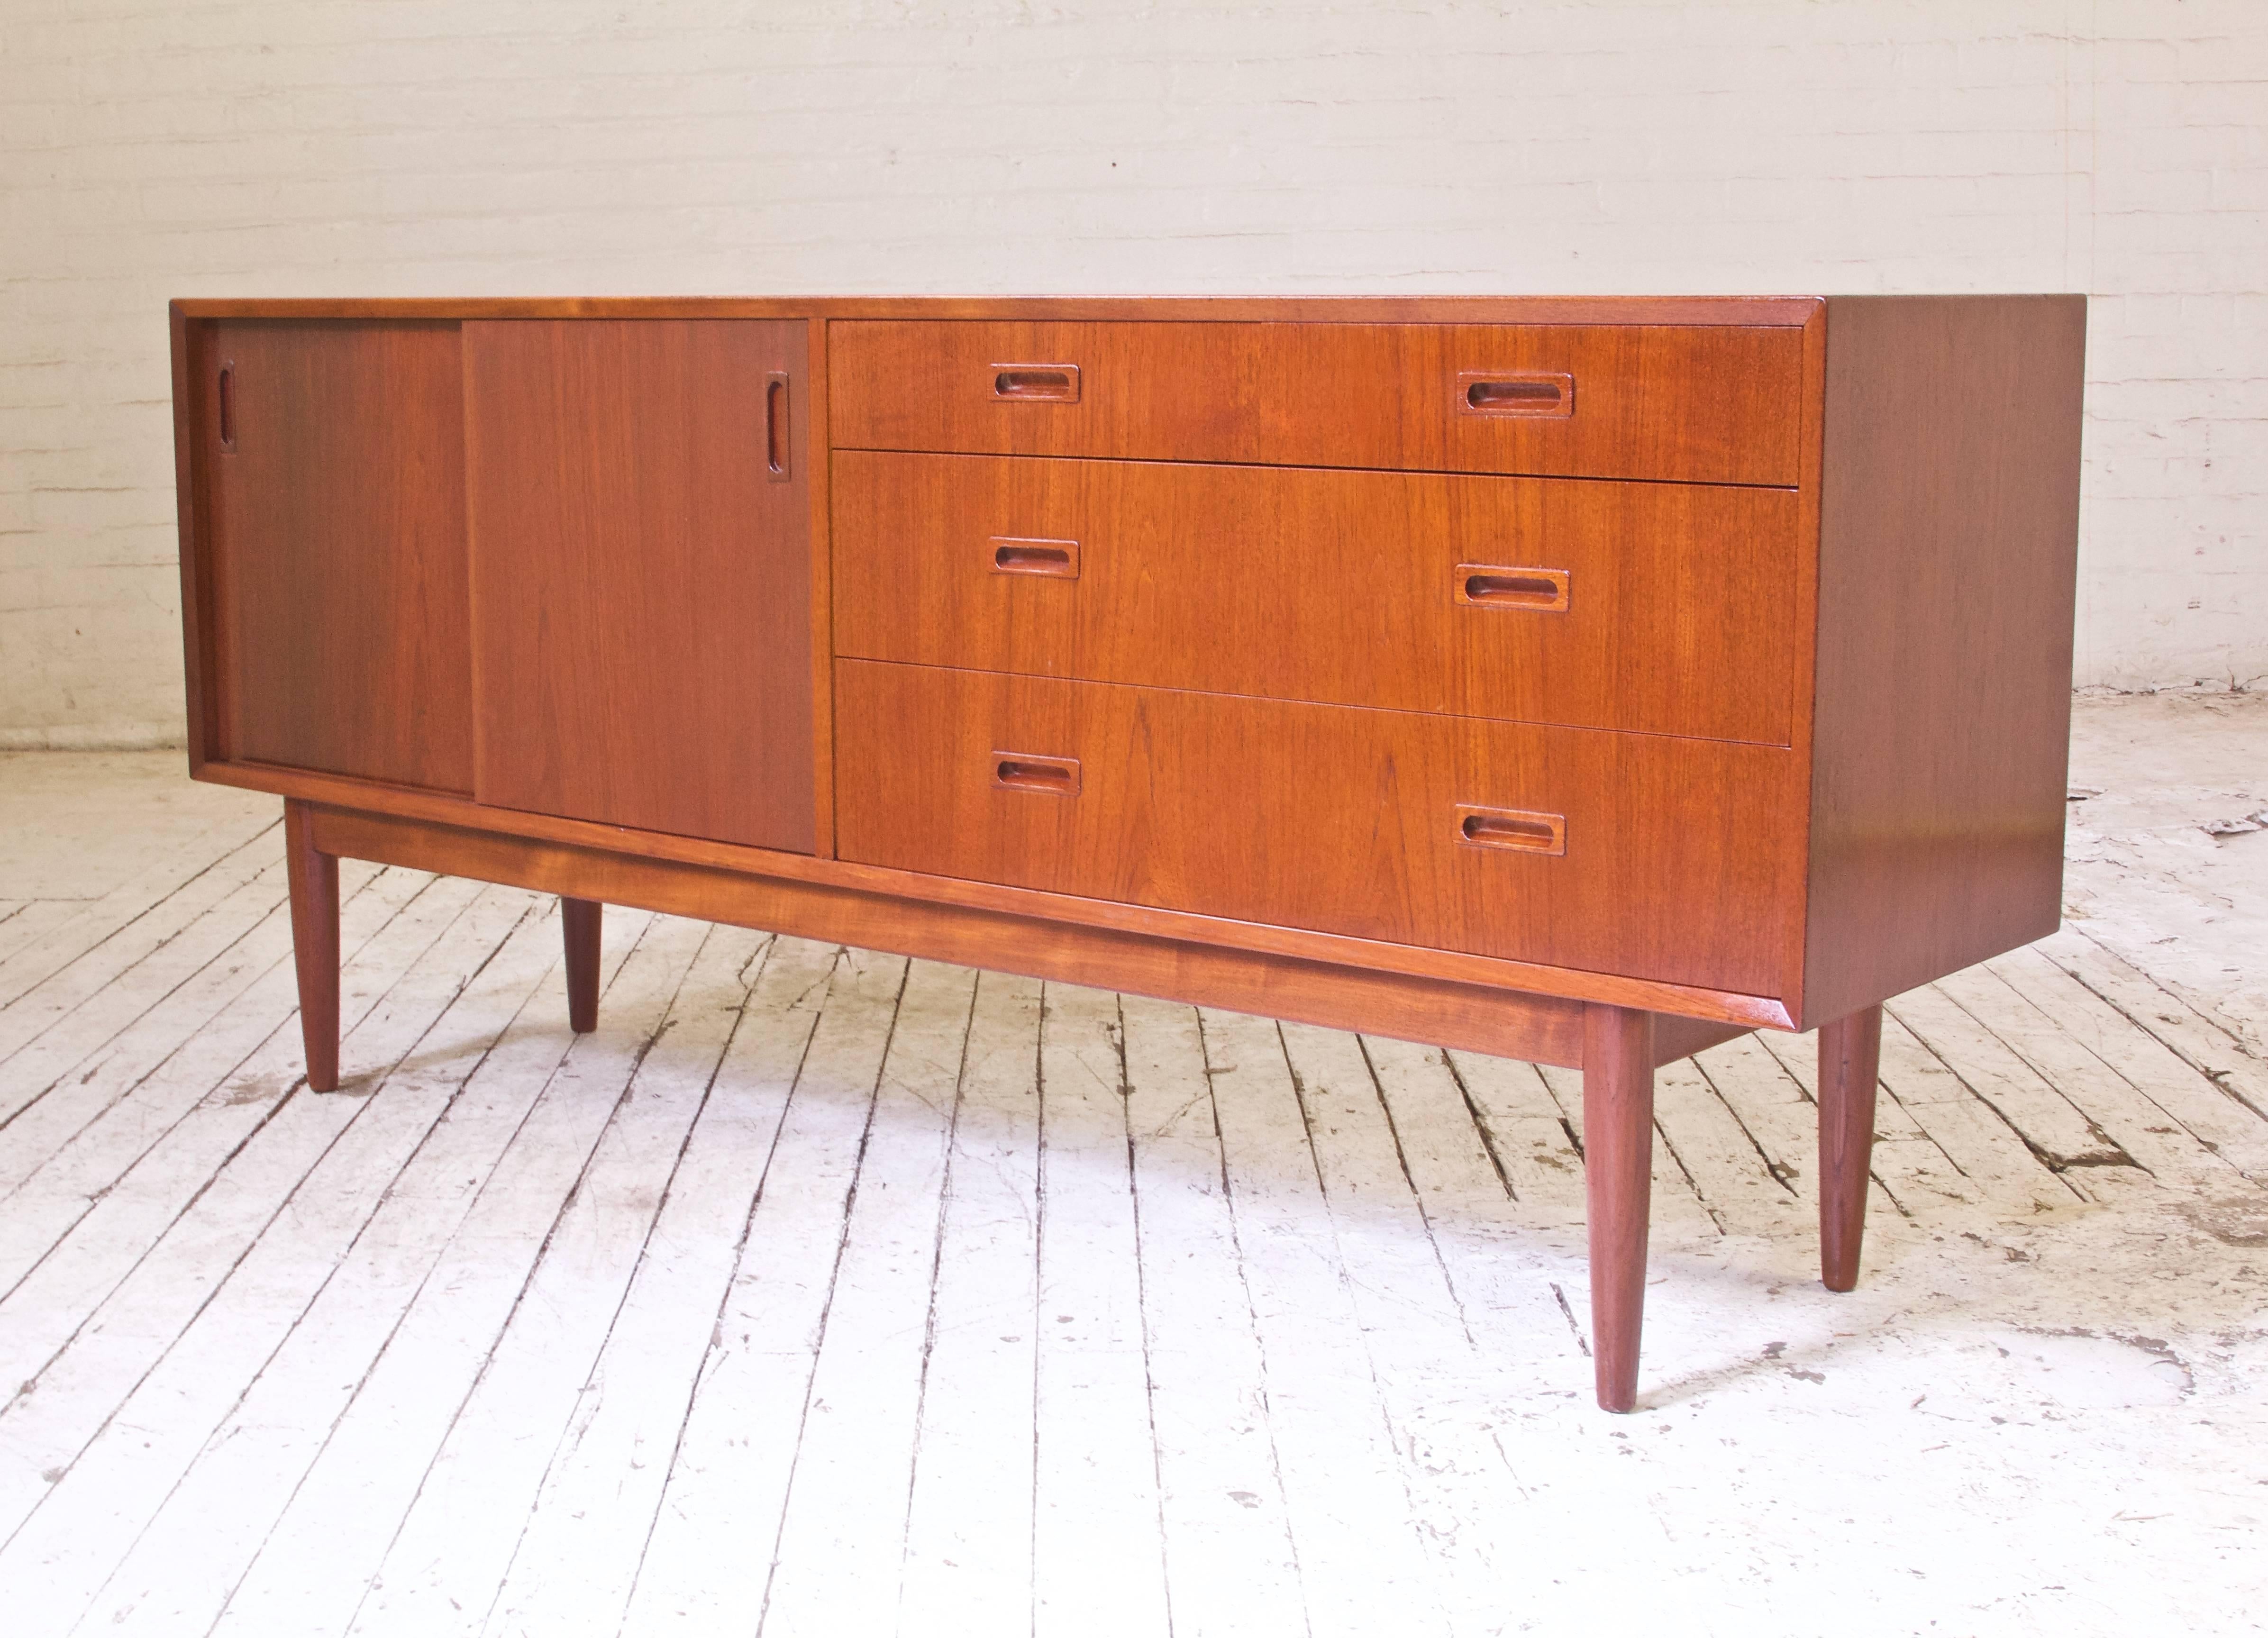 Lovingly restored and polished vintage Danish sideboard in teak with four drawers and two sliding doors. Sliding doors open to reveal two compartments complete with three adjustable shelves. Gorgeous tone throughout, the back of the piece is